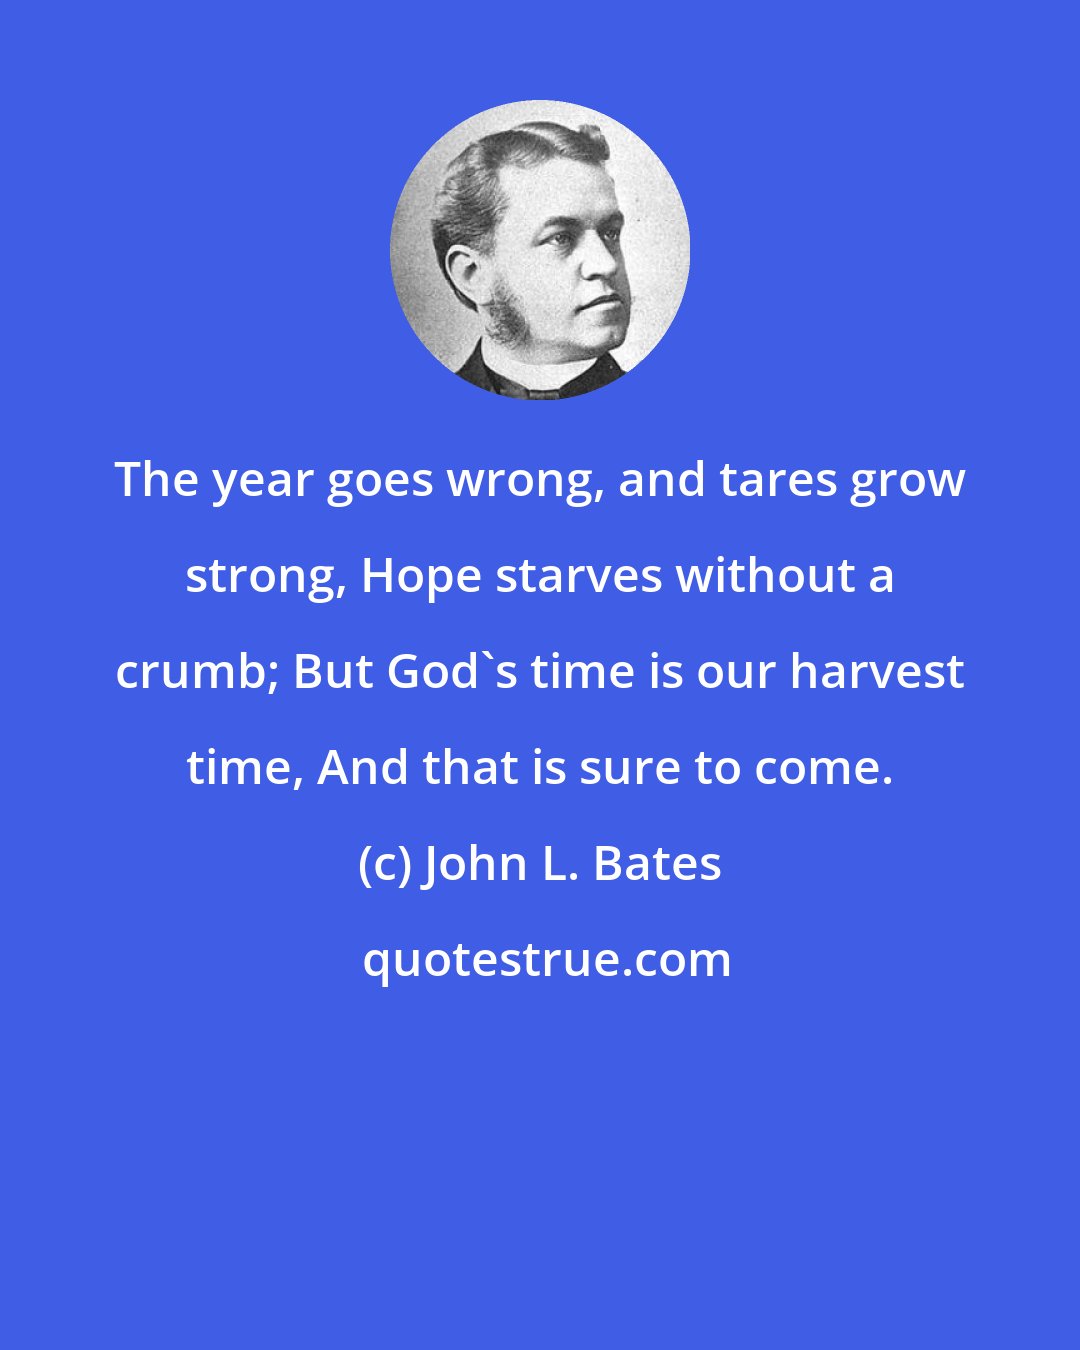 John L. Bates: The year goes wrong, and tares grow strong, Hope starves without a crumb; But God's time is our harvest time, And that is sure to come.